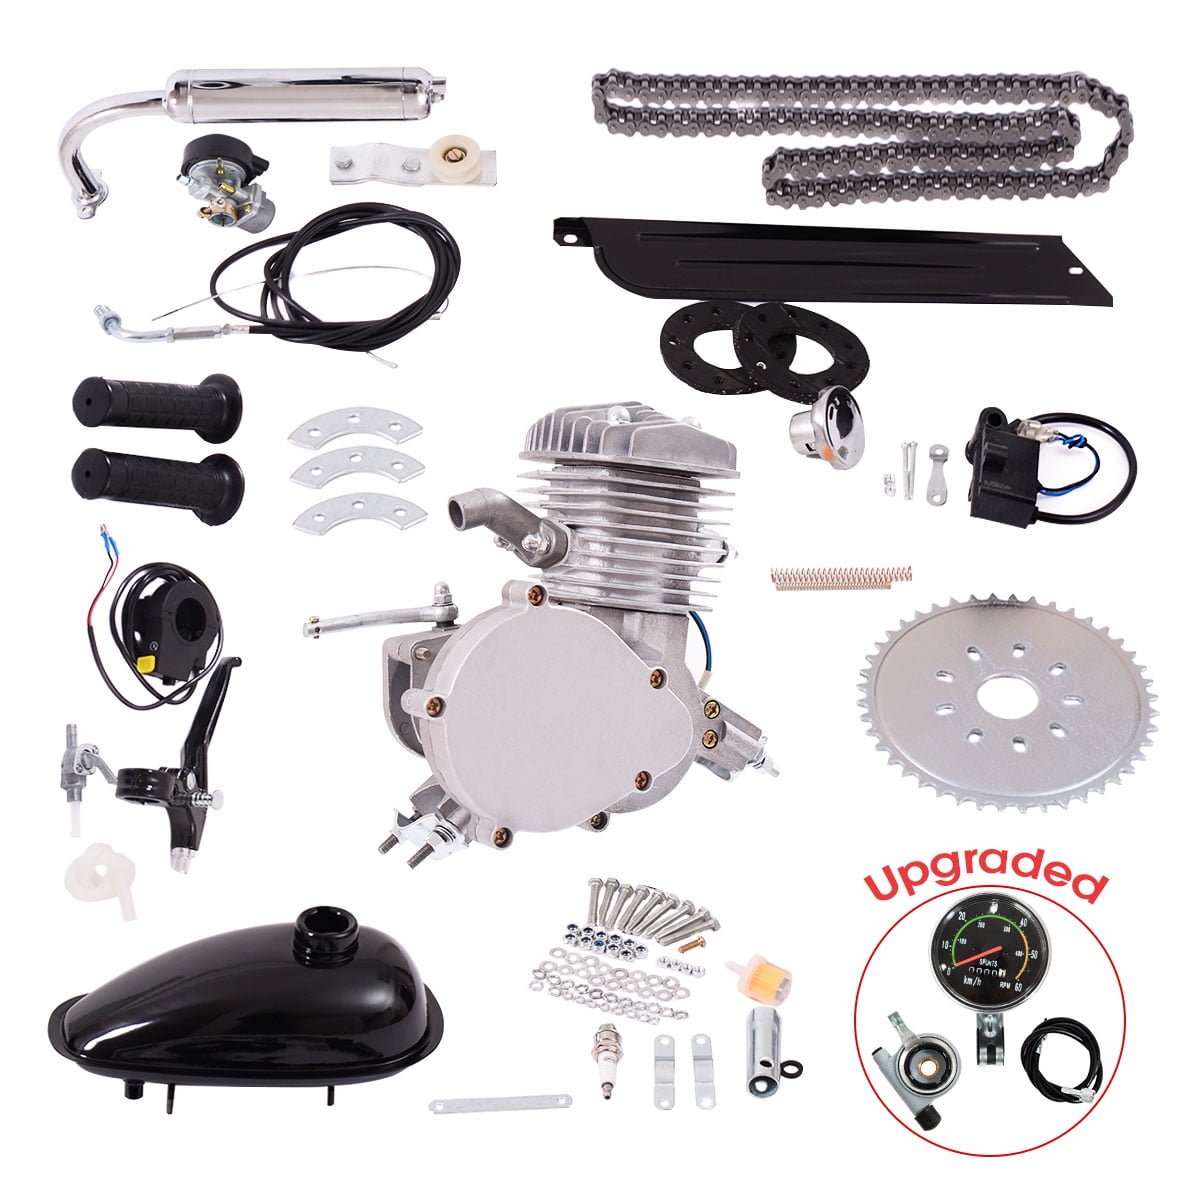 Full Set Bicycle Motor Kit 2 Stroke Petrol Gas Motor Engine Kit Set Boddenly Complete Engine Kit W/Upgraded Chain Tension Silver for 80cc 2 Stroke Gas Motorized Bicycle Bike Motorized Bicycle Kit 